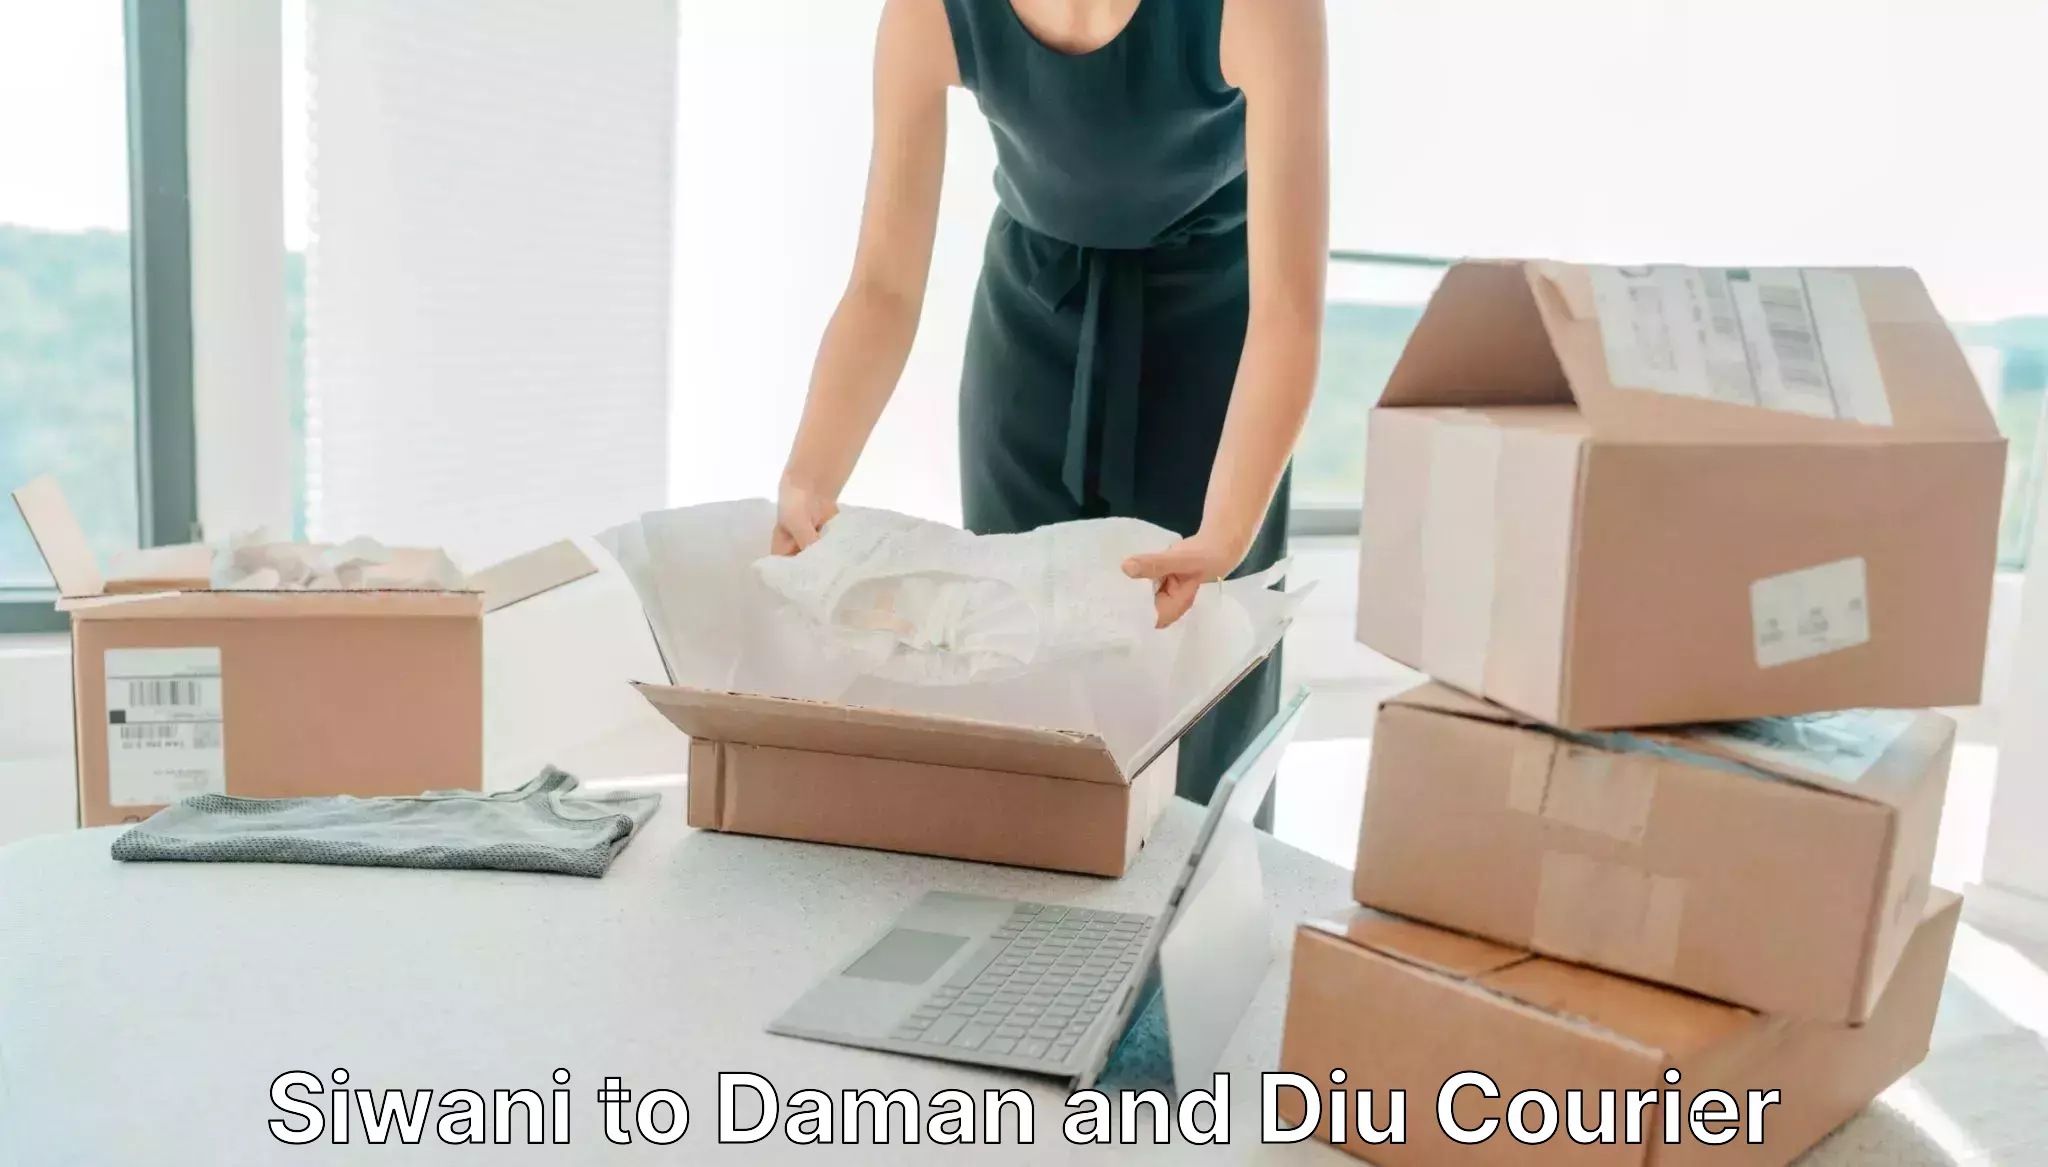 Flexible delivery scheduling Siwani to Daman and Diu